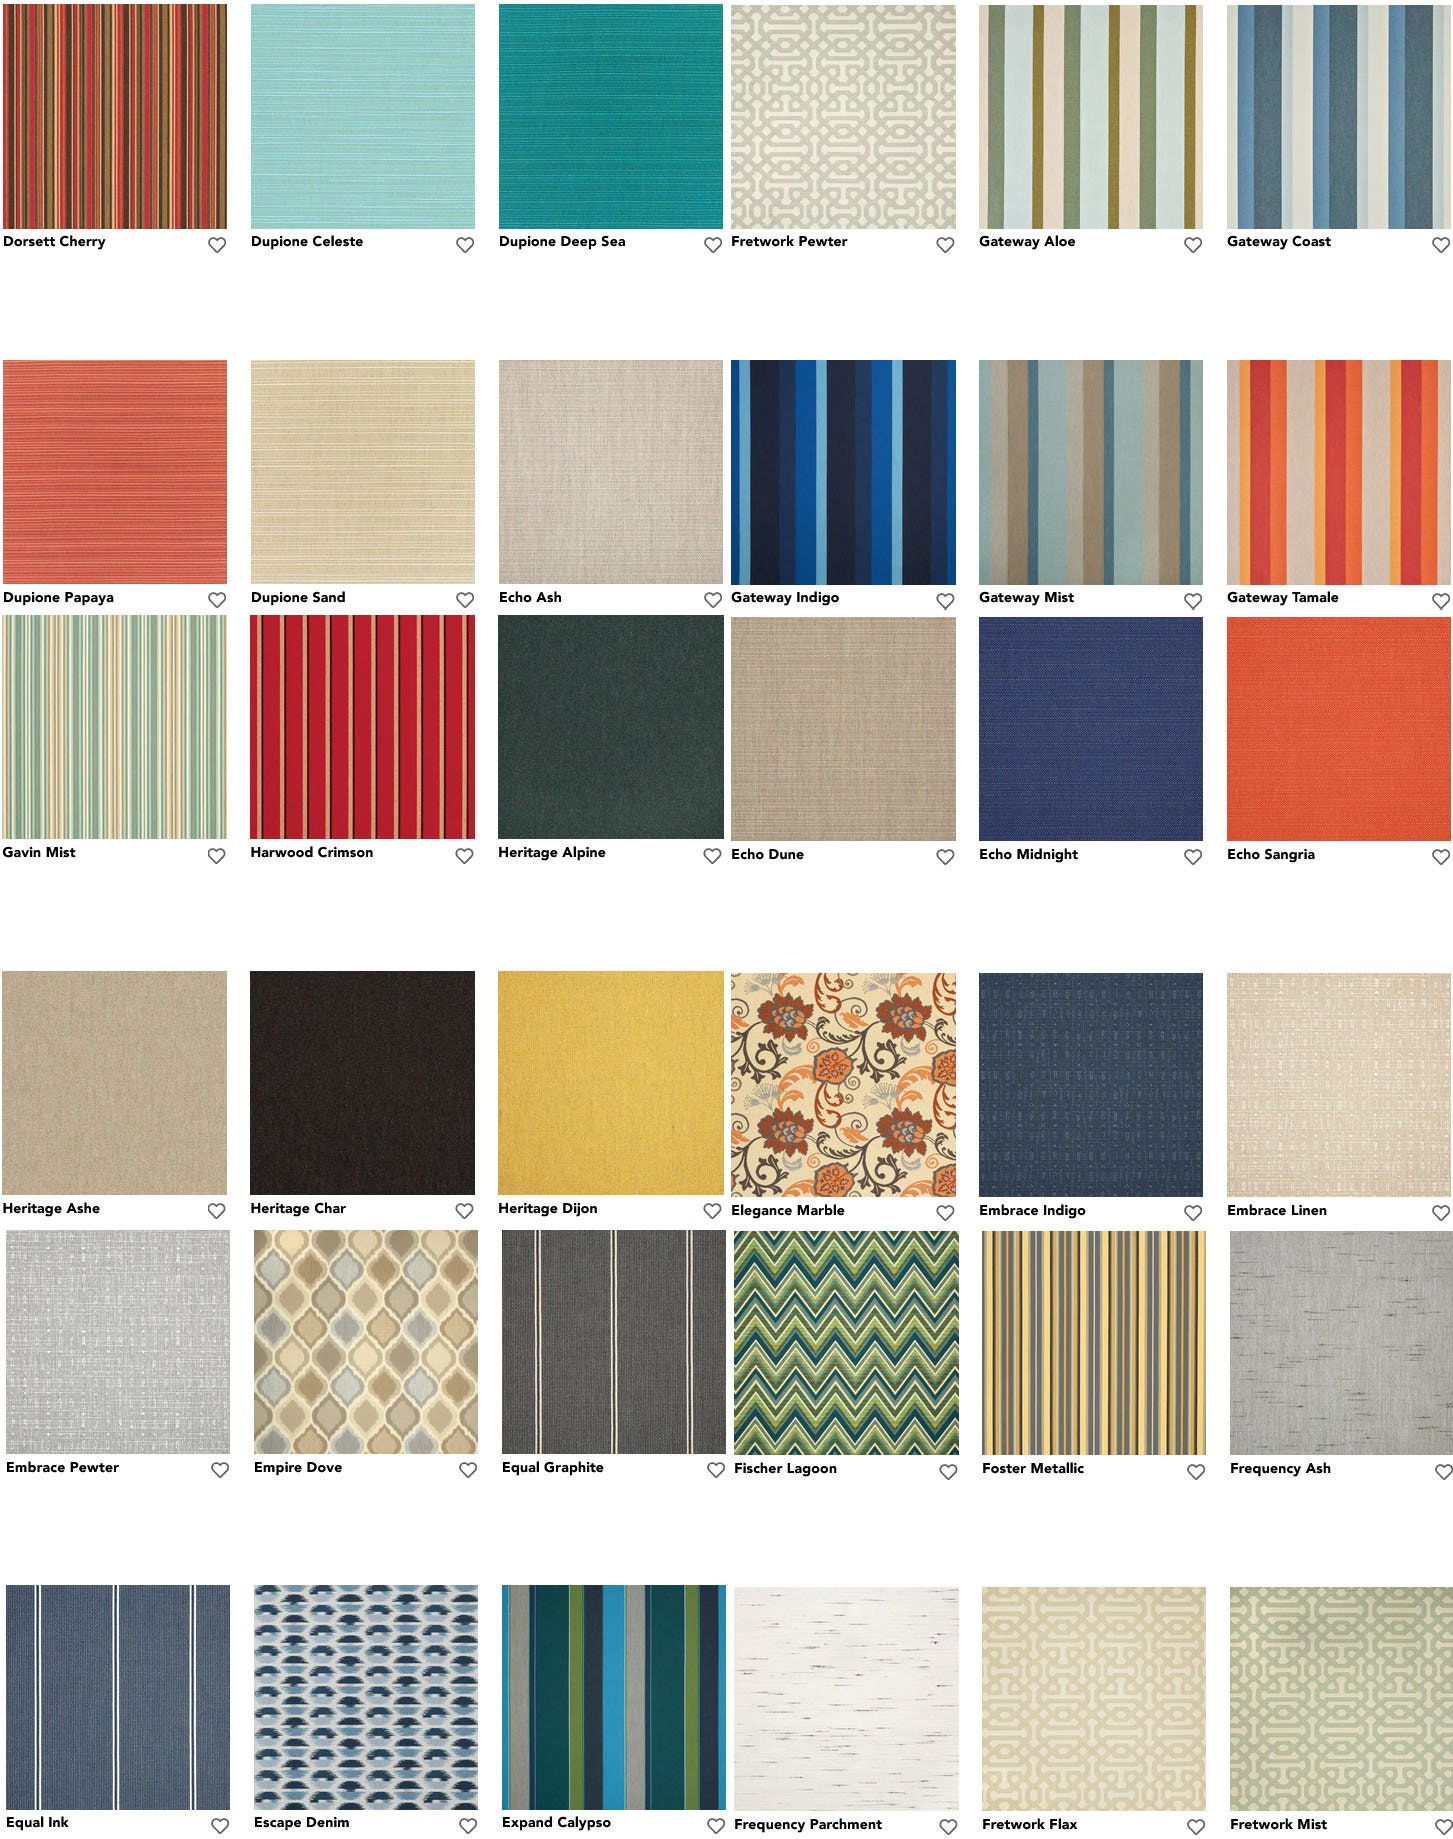 Sunbrella Fabric Samples Sunbrella Upholstery Collections 10 Fabric  Swatches Indoor / Outdoor Upholstery Fabric Samples Elements 